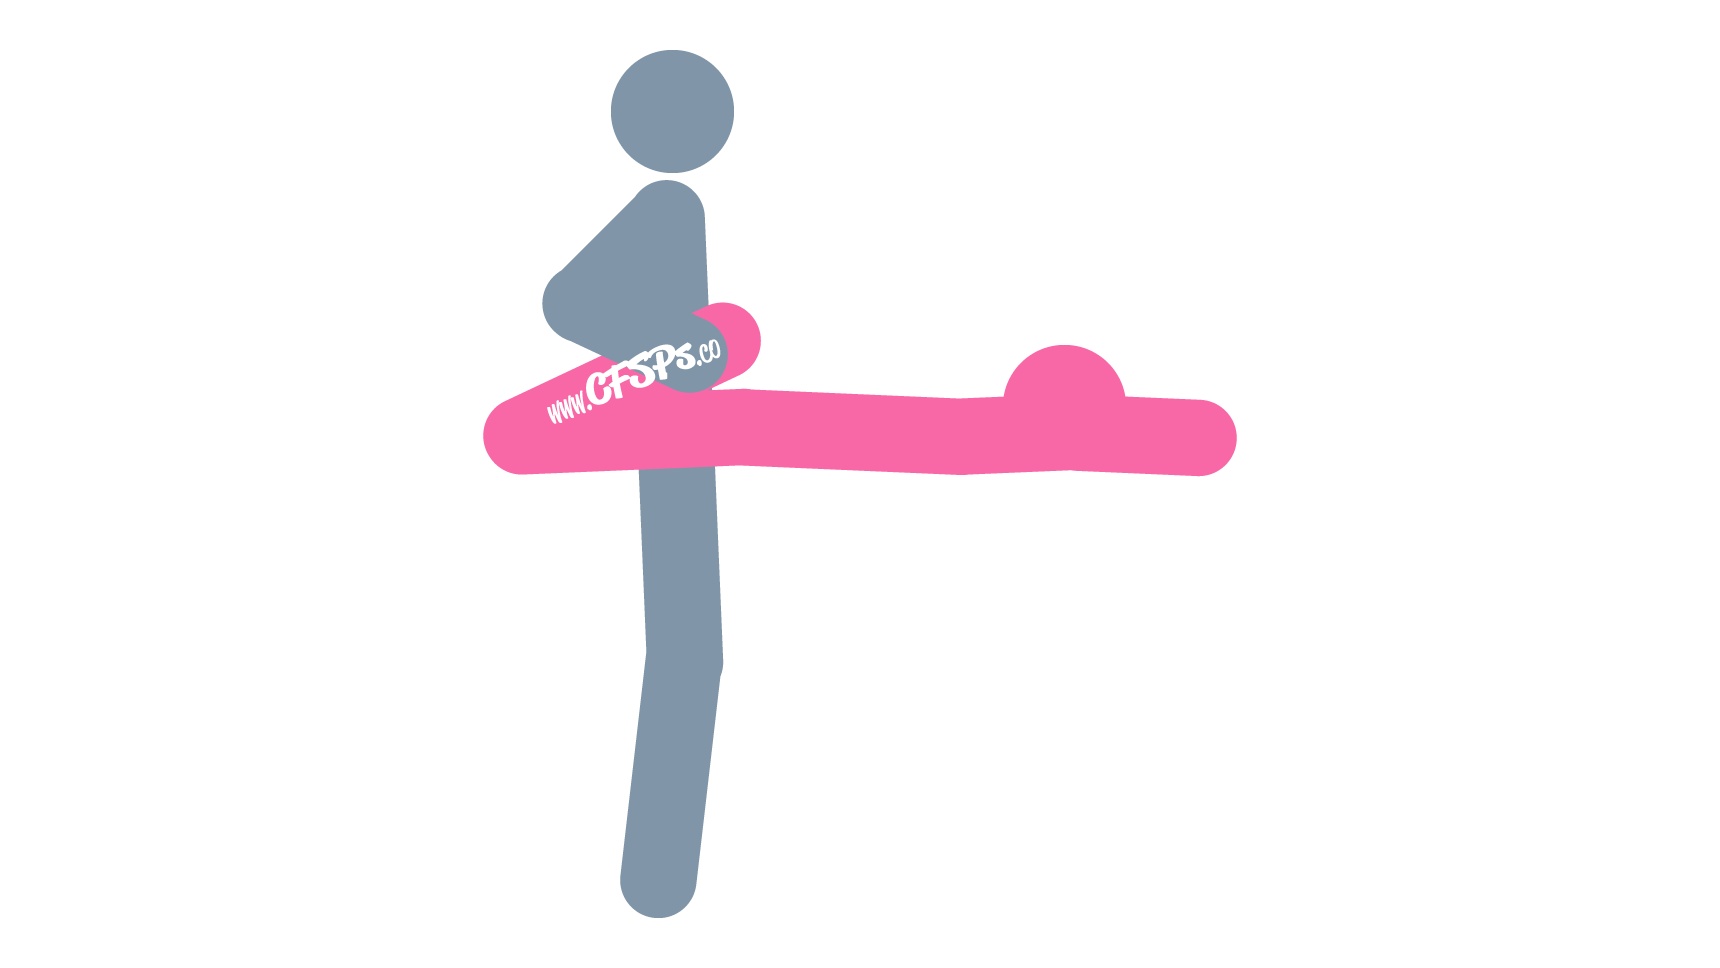 This stick figure image depicts a man and woman having sex in the Ohhh sex position. The woman is lying on her stomach with her pelvis at the edge of the bed. The man is standing behind her between her legs. The woman's legs are parallel to her body, and her knees are bent all the way. The man is holding her legs for support.